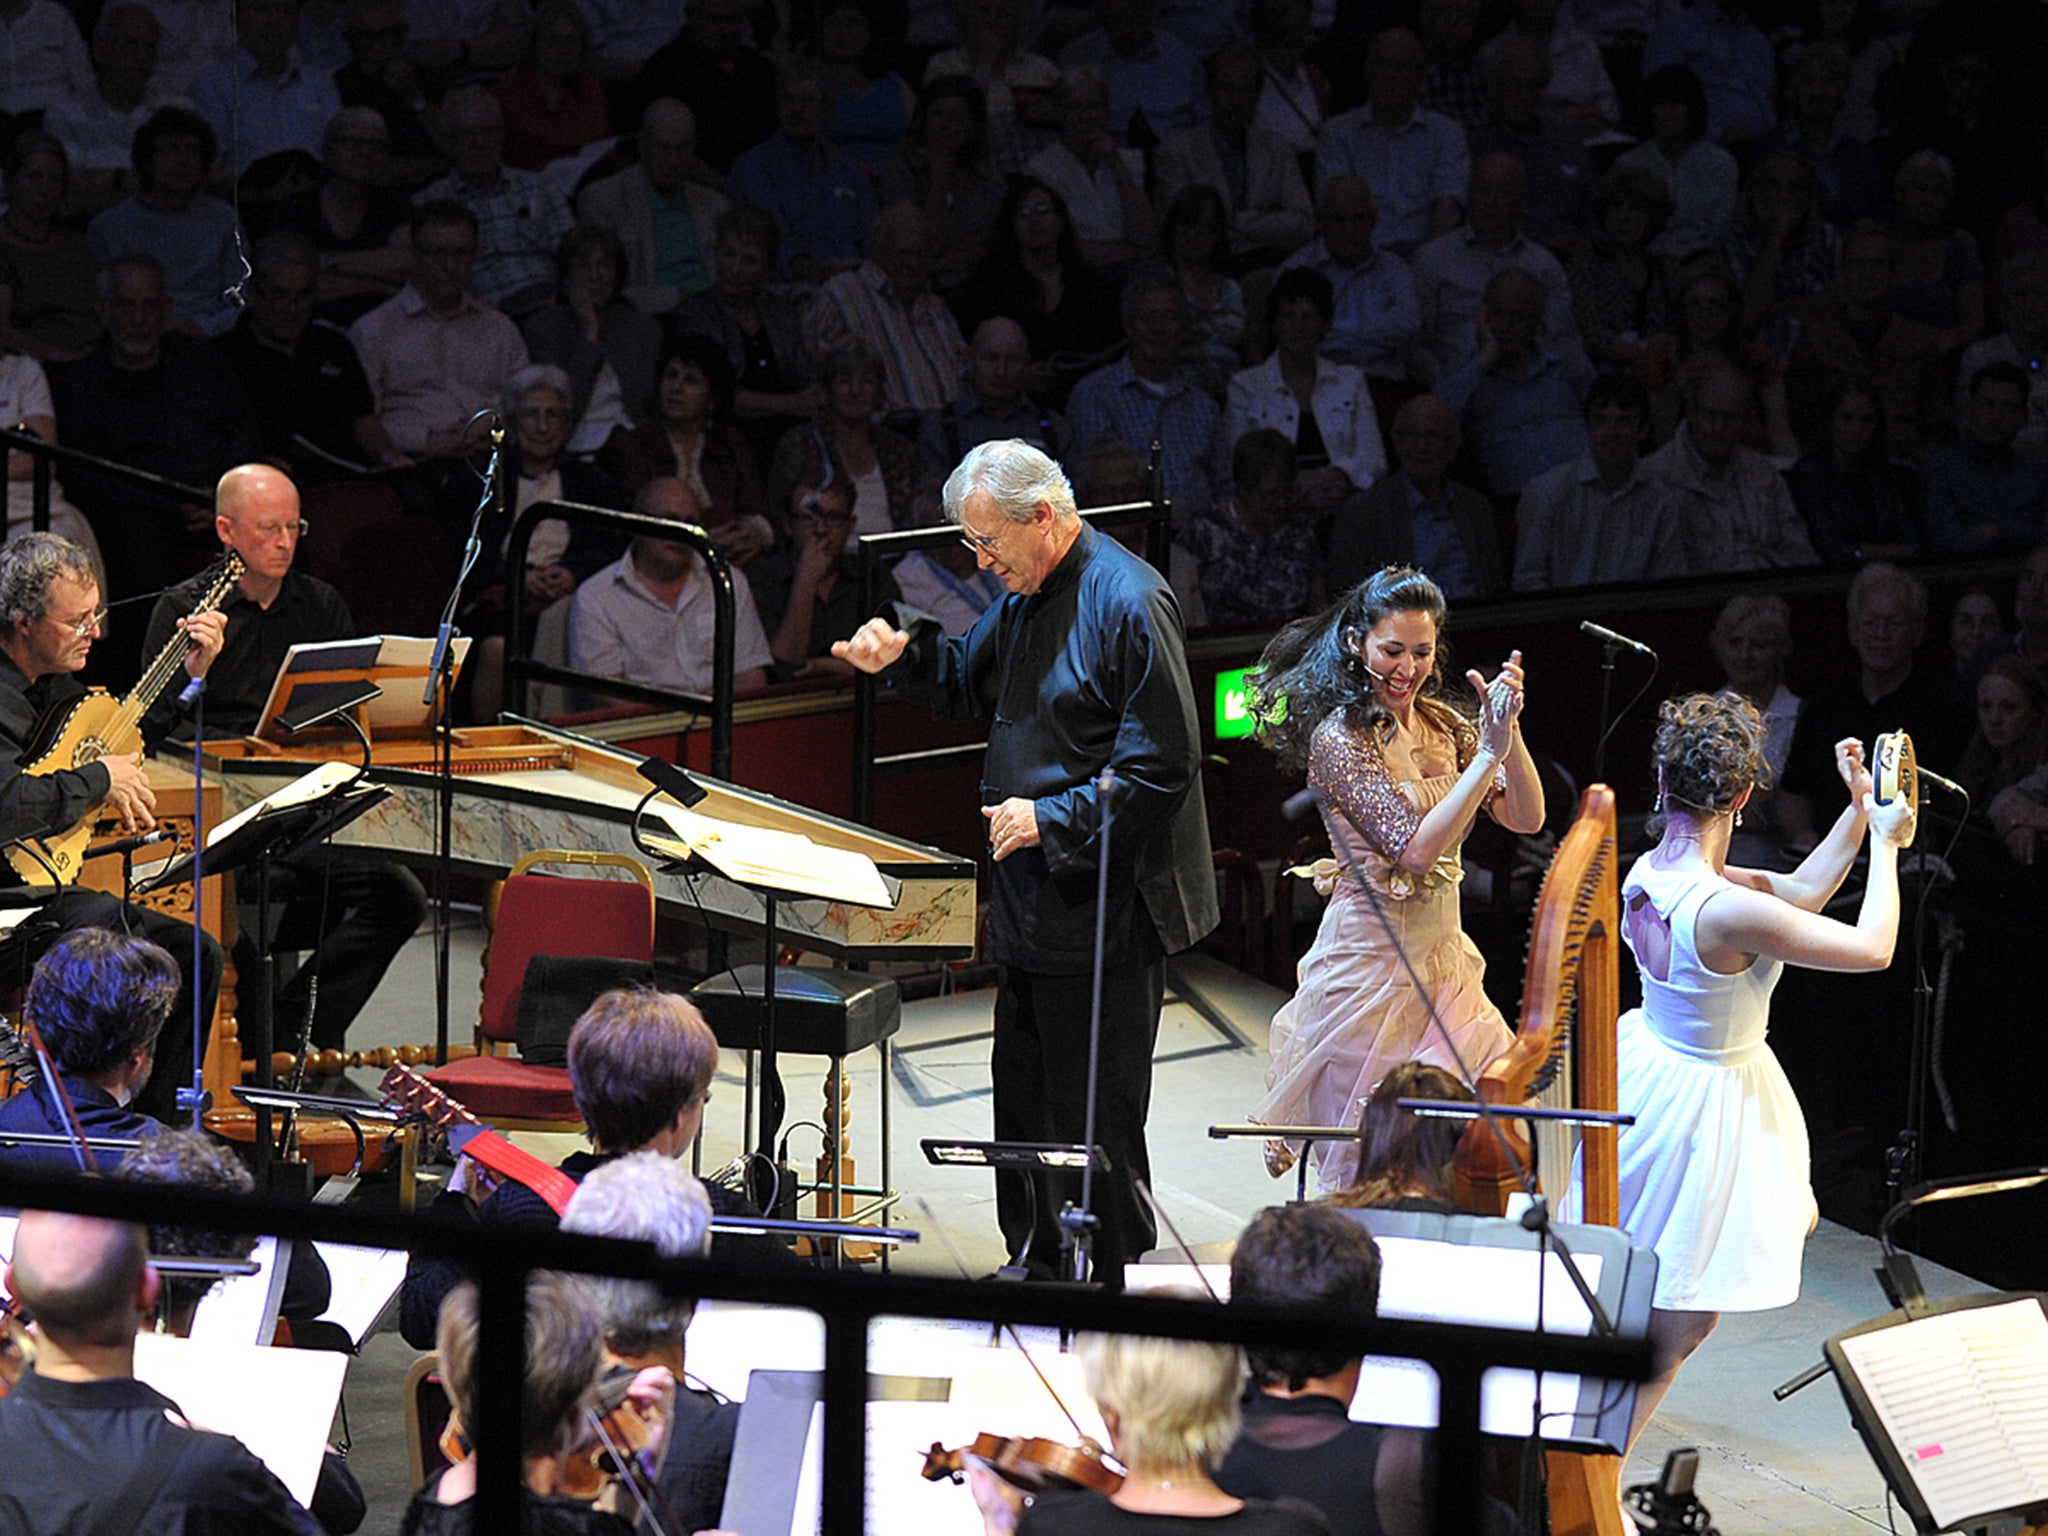 (L-R) Mariana Flores and Francesca Aspromonte as Eurydice and Music in a performance of Monteverdi’s Orfeo at the BBC Proms on Tuesday 4 August, with the English Baroque Soloists, conducted by Sir John Eliot Gardiner.